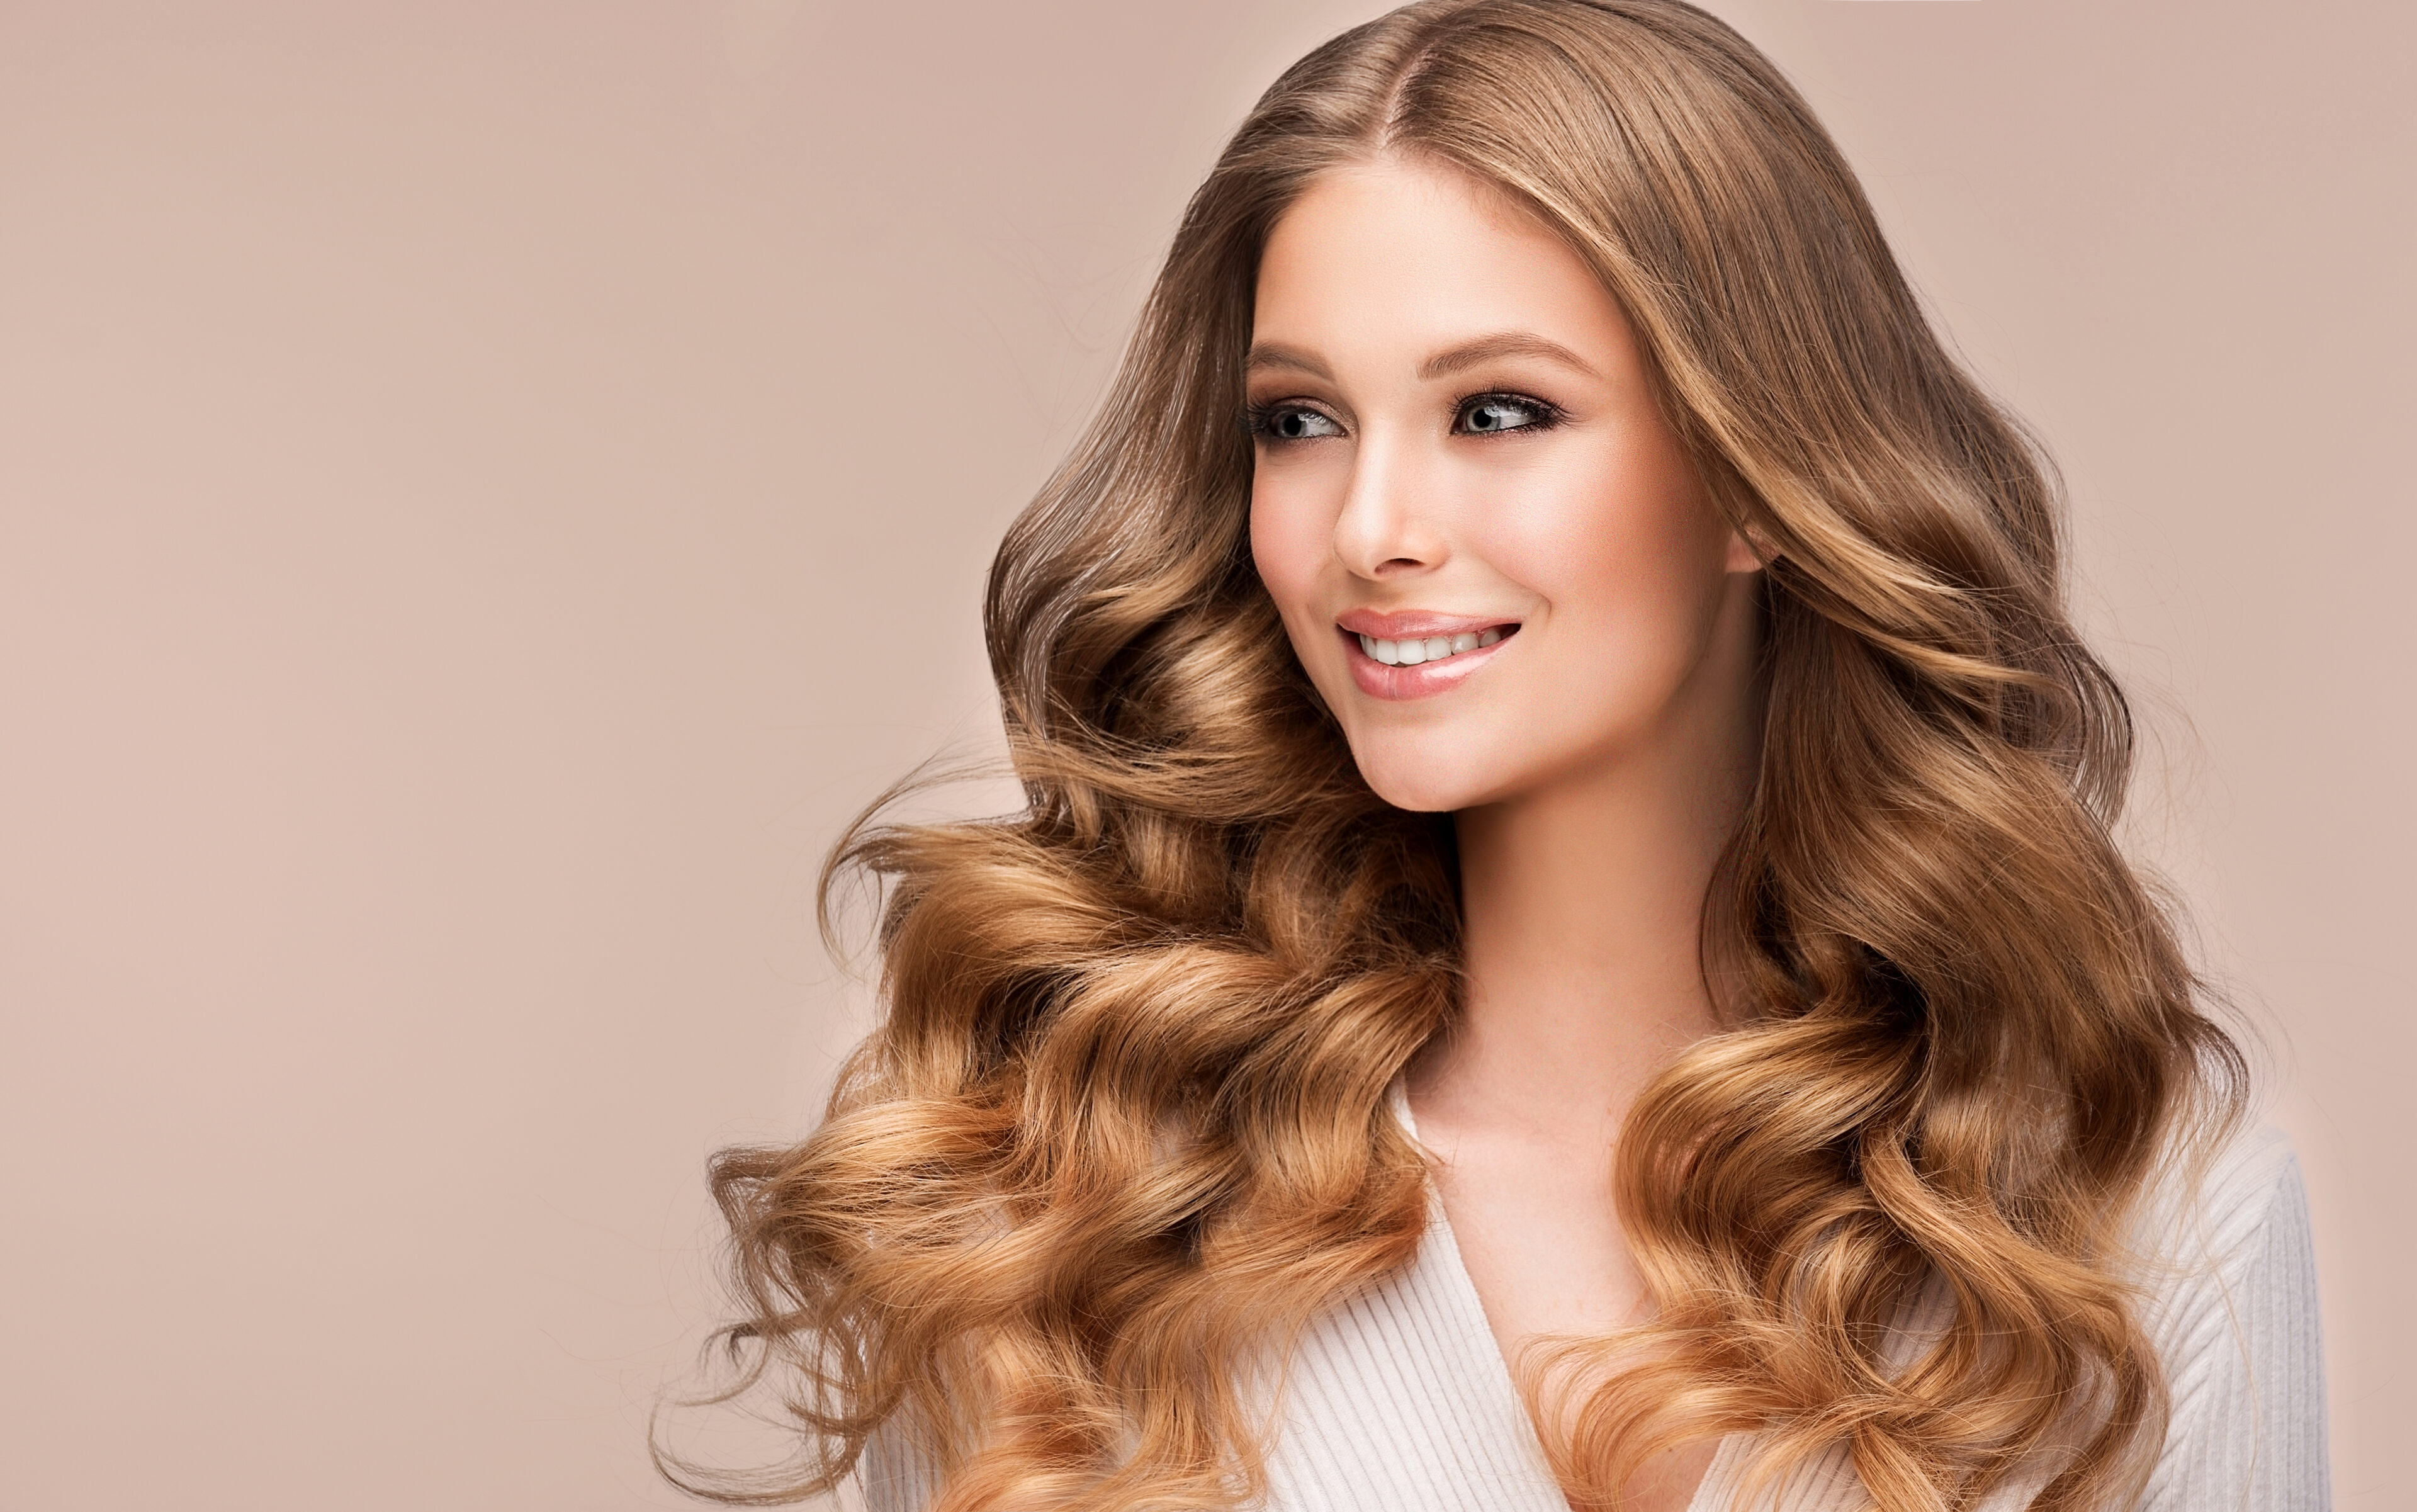 Beauty blonde girl with long and shiny wavy hair